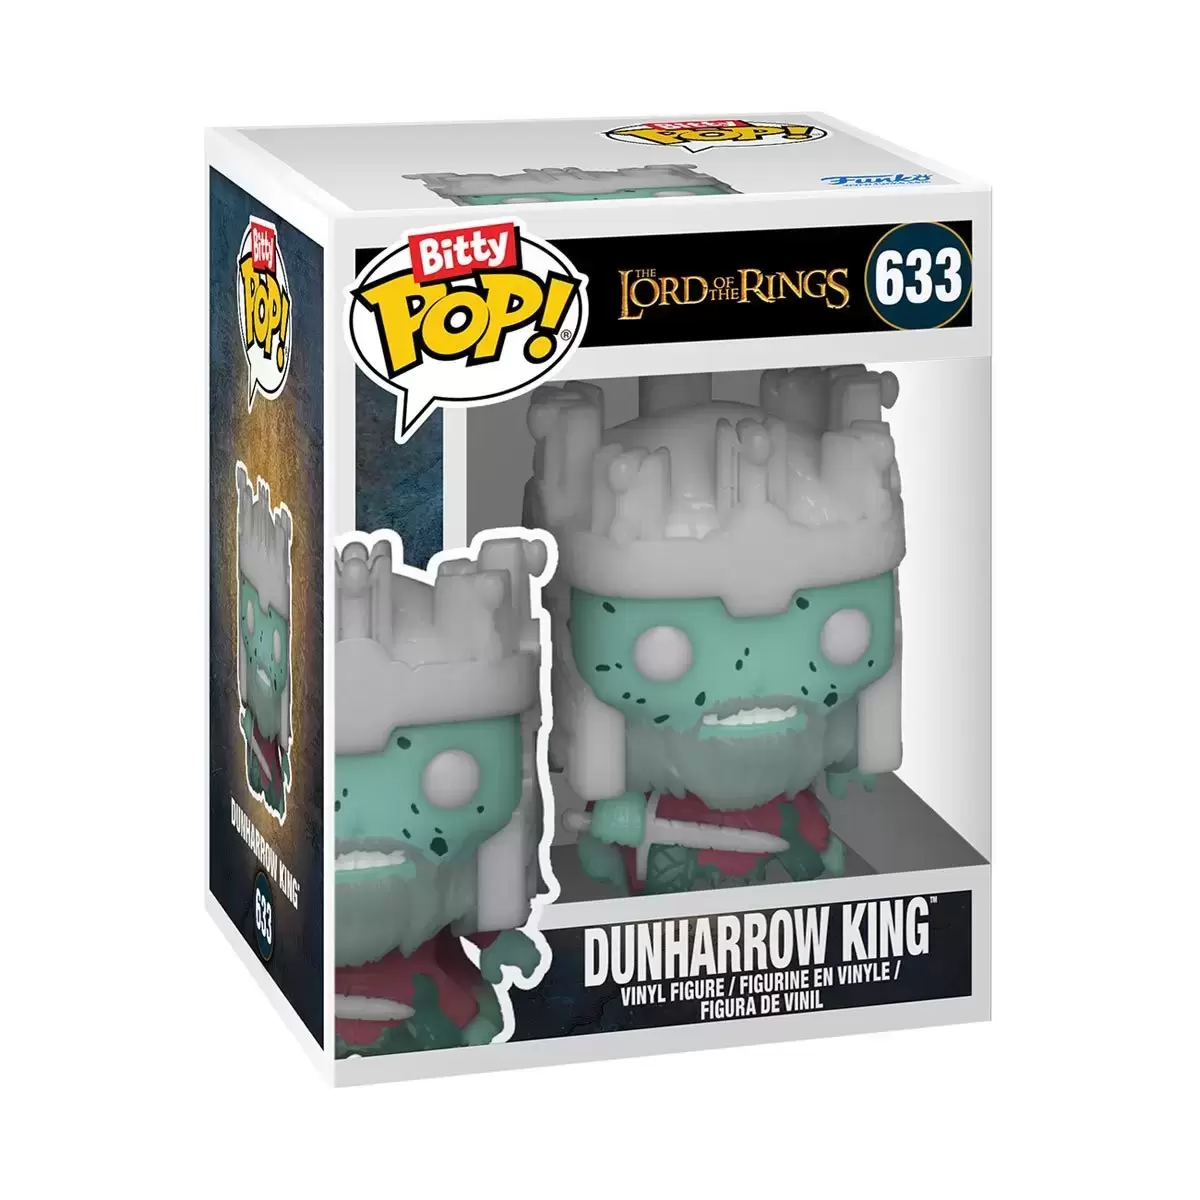 Bitty POP! - Lord of The Rings - Dunharrow King